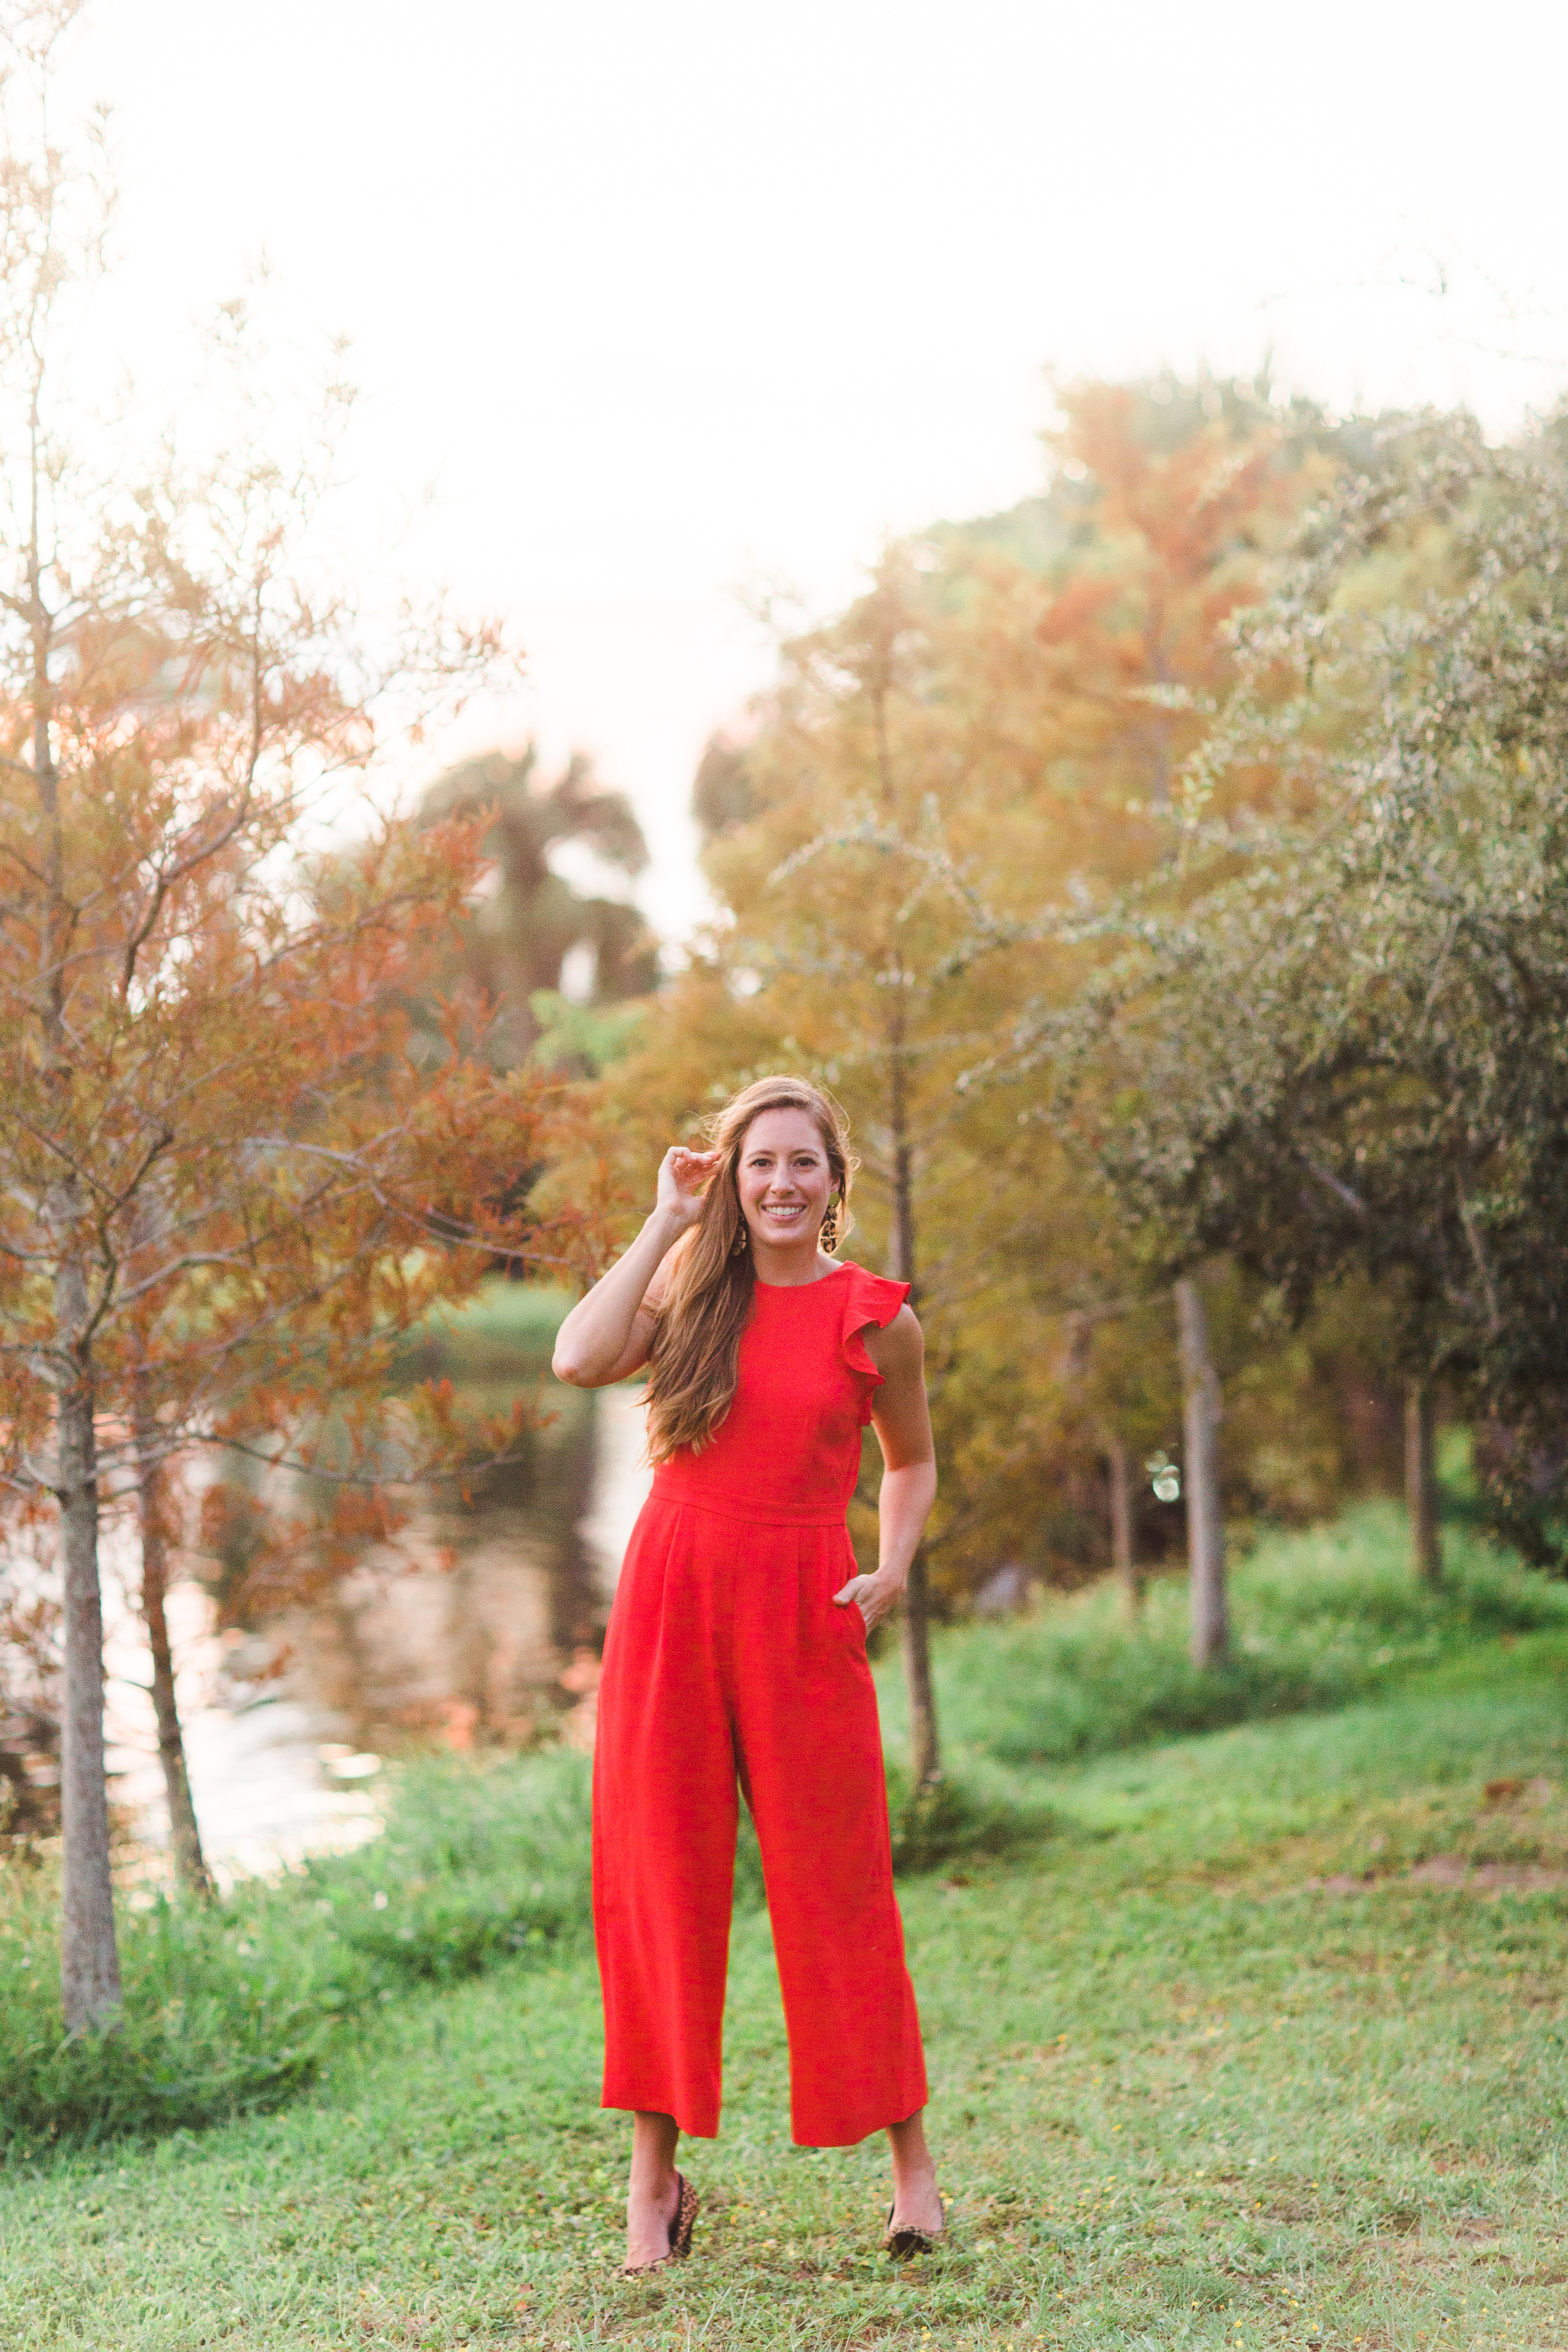 A Festive J.Crew Jumpsuit for Christmas / How to Style a Jumpsuit / How to Style a Jumpsuit for the Holidays / What to Wear to an Office Party / What to Wear on Christmas - Sunshine Style